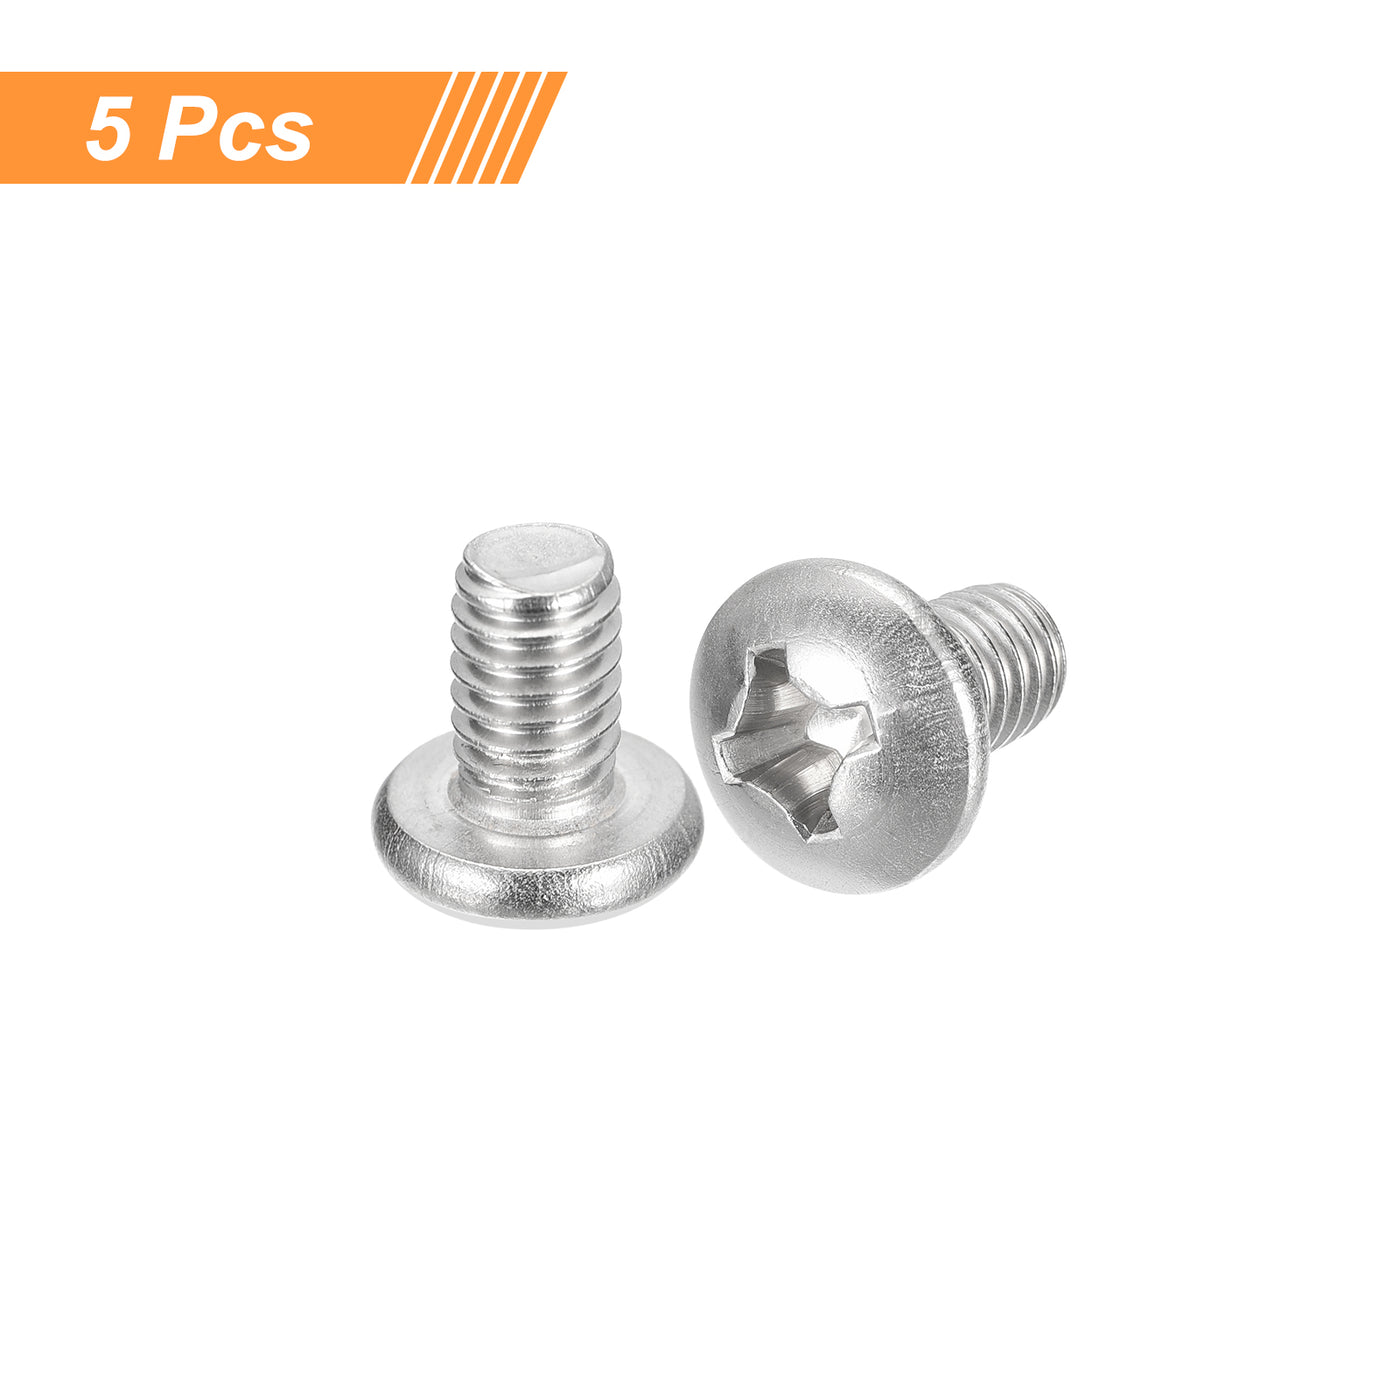 uxcell Uxcell 5/16-18x1/2" Pan Head Machine Screws, Stainless Steel 18-8 Screw, Pack of 5